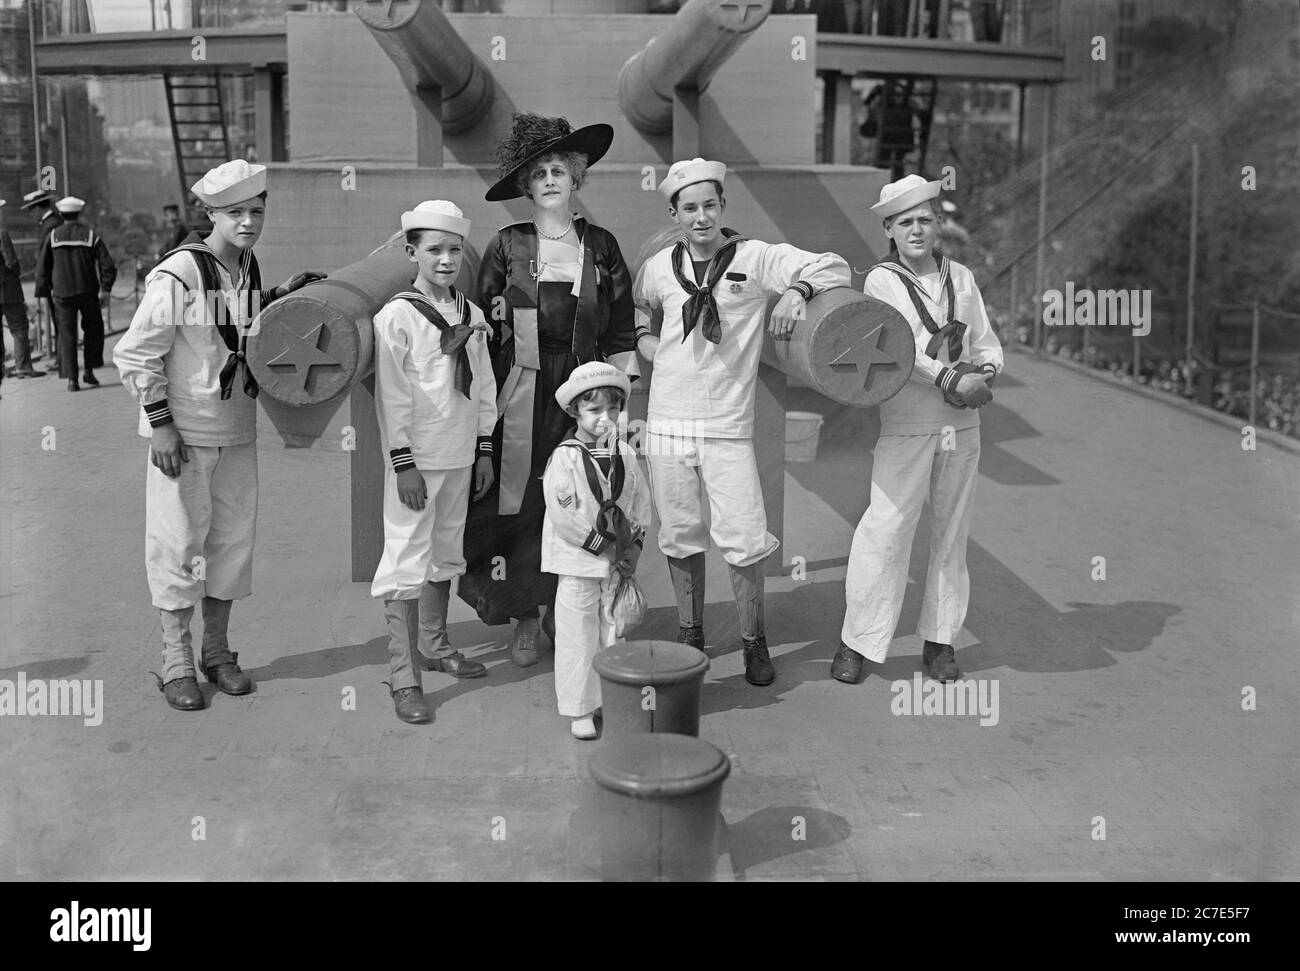 Grace Carley Harriman (1873-1950) with Junior Naval and Marine Scouts on the U.S.S. Recruit, a Fake Battleship built by the Navy to recruit Seamen and sell Liberty Bonds during World War I, Union Square, New York City, New York, USA, Bain News Service, 1917 Stock Photo